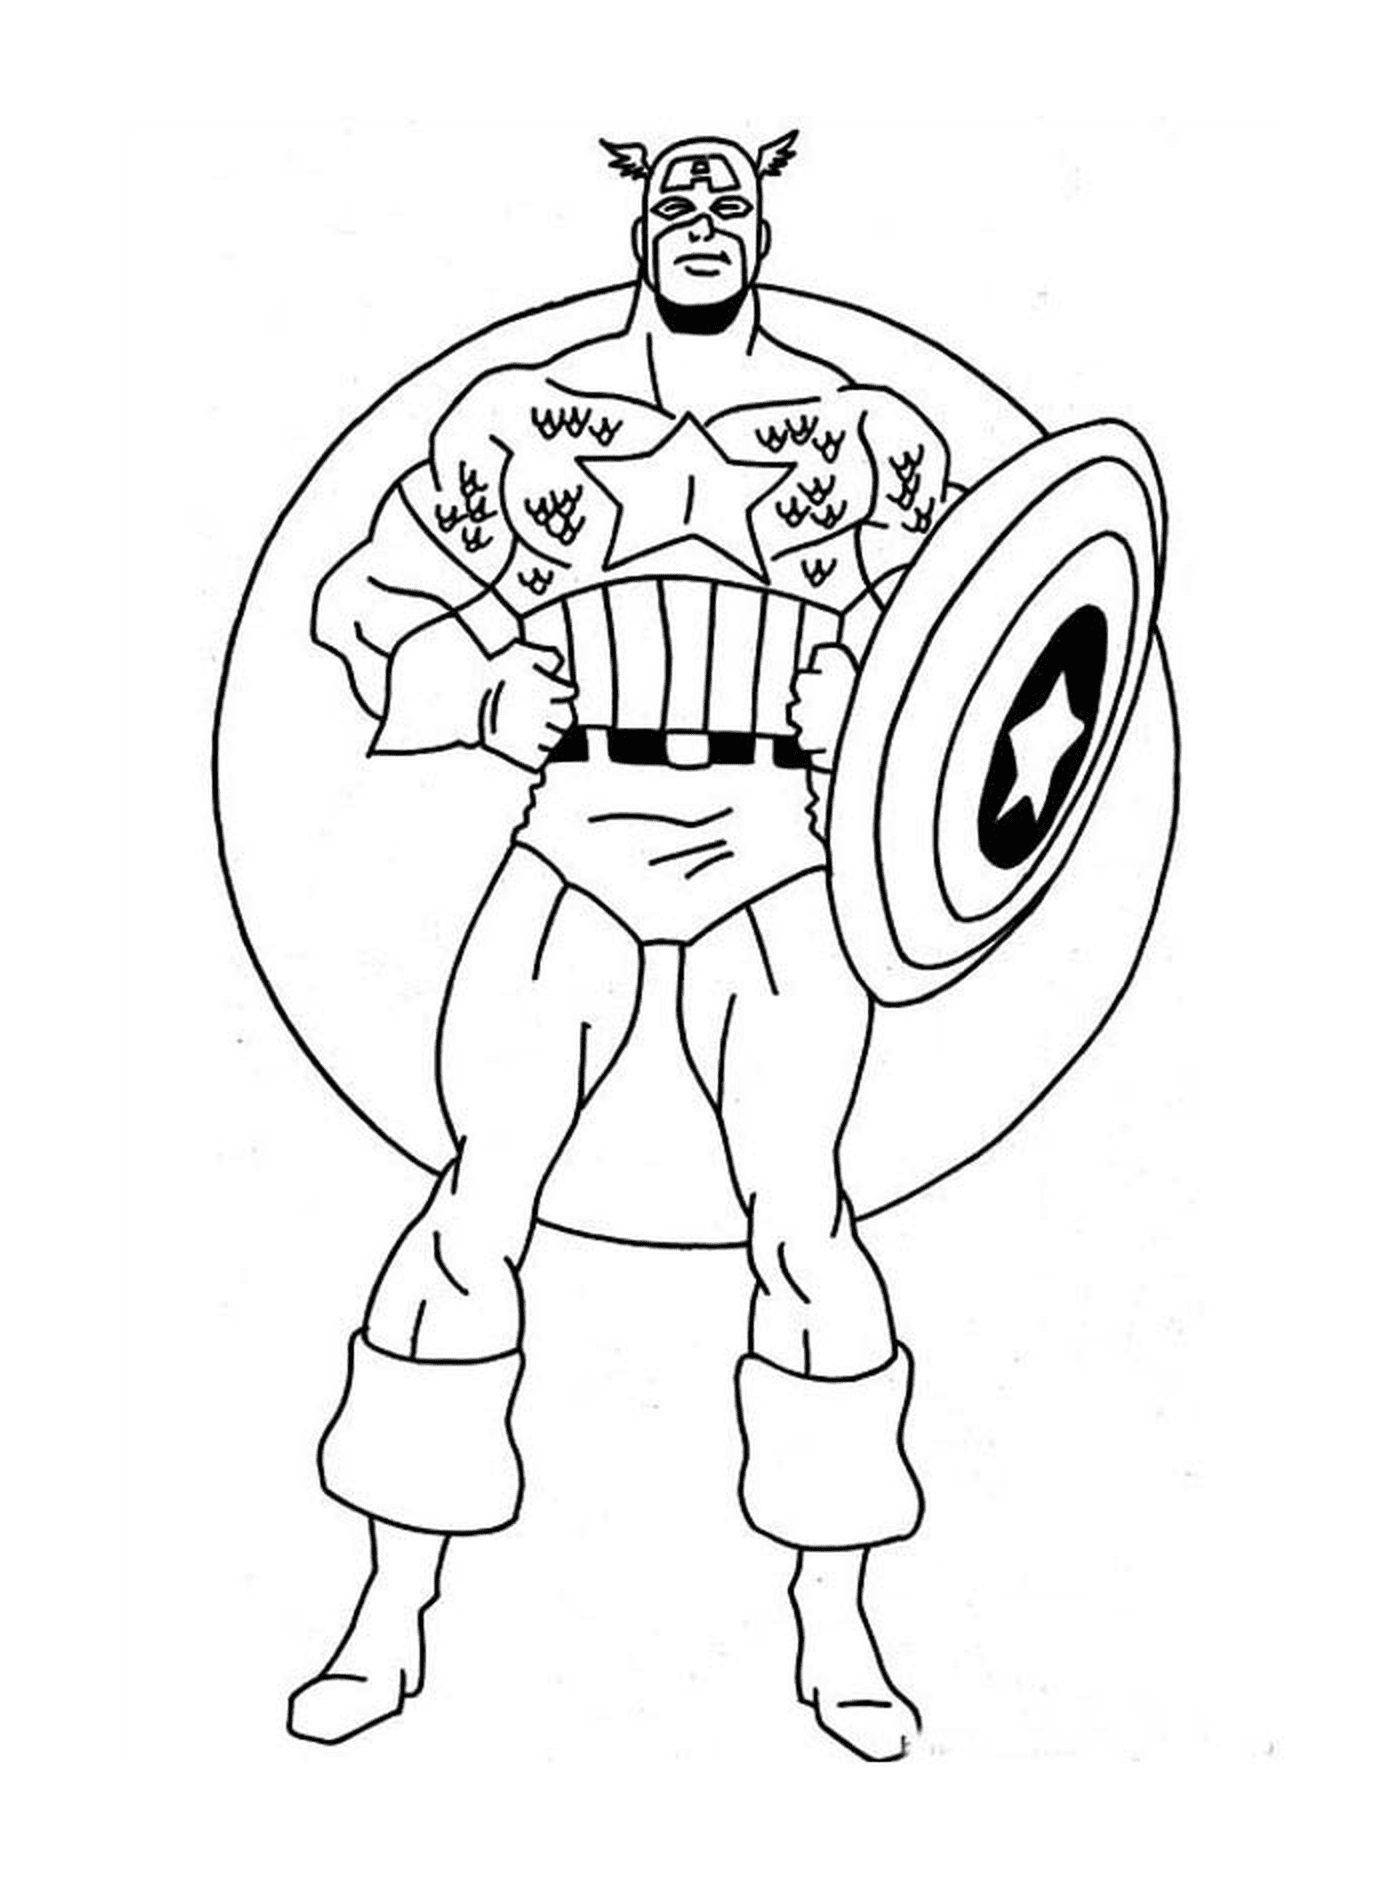  The image of Captain America 